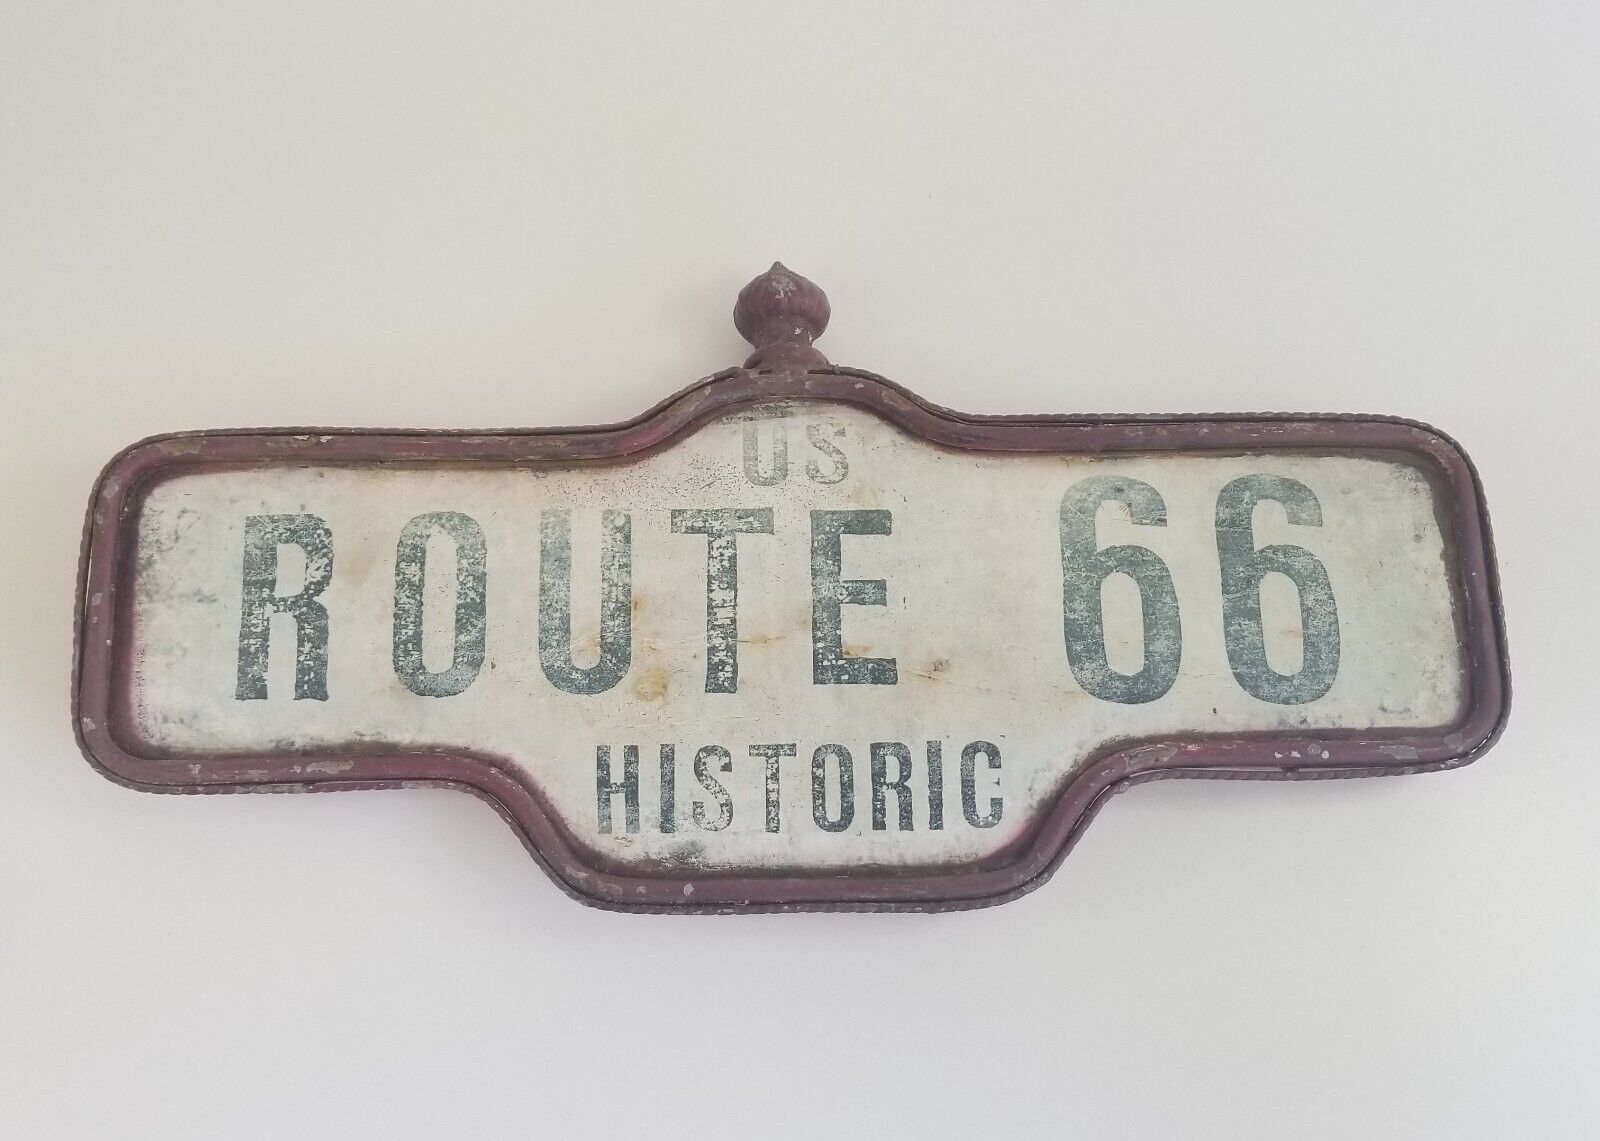 Historic US Route 66 Wall Mounted Street Sign Rustic 